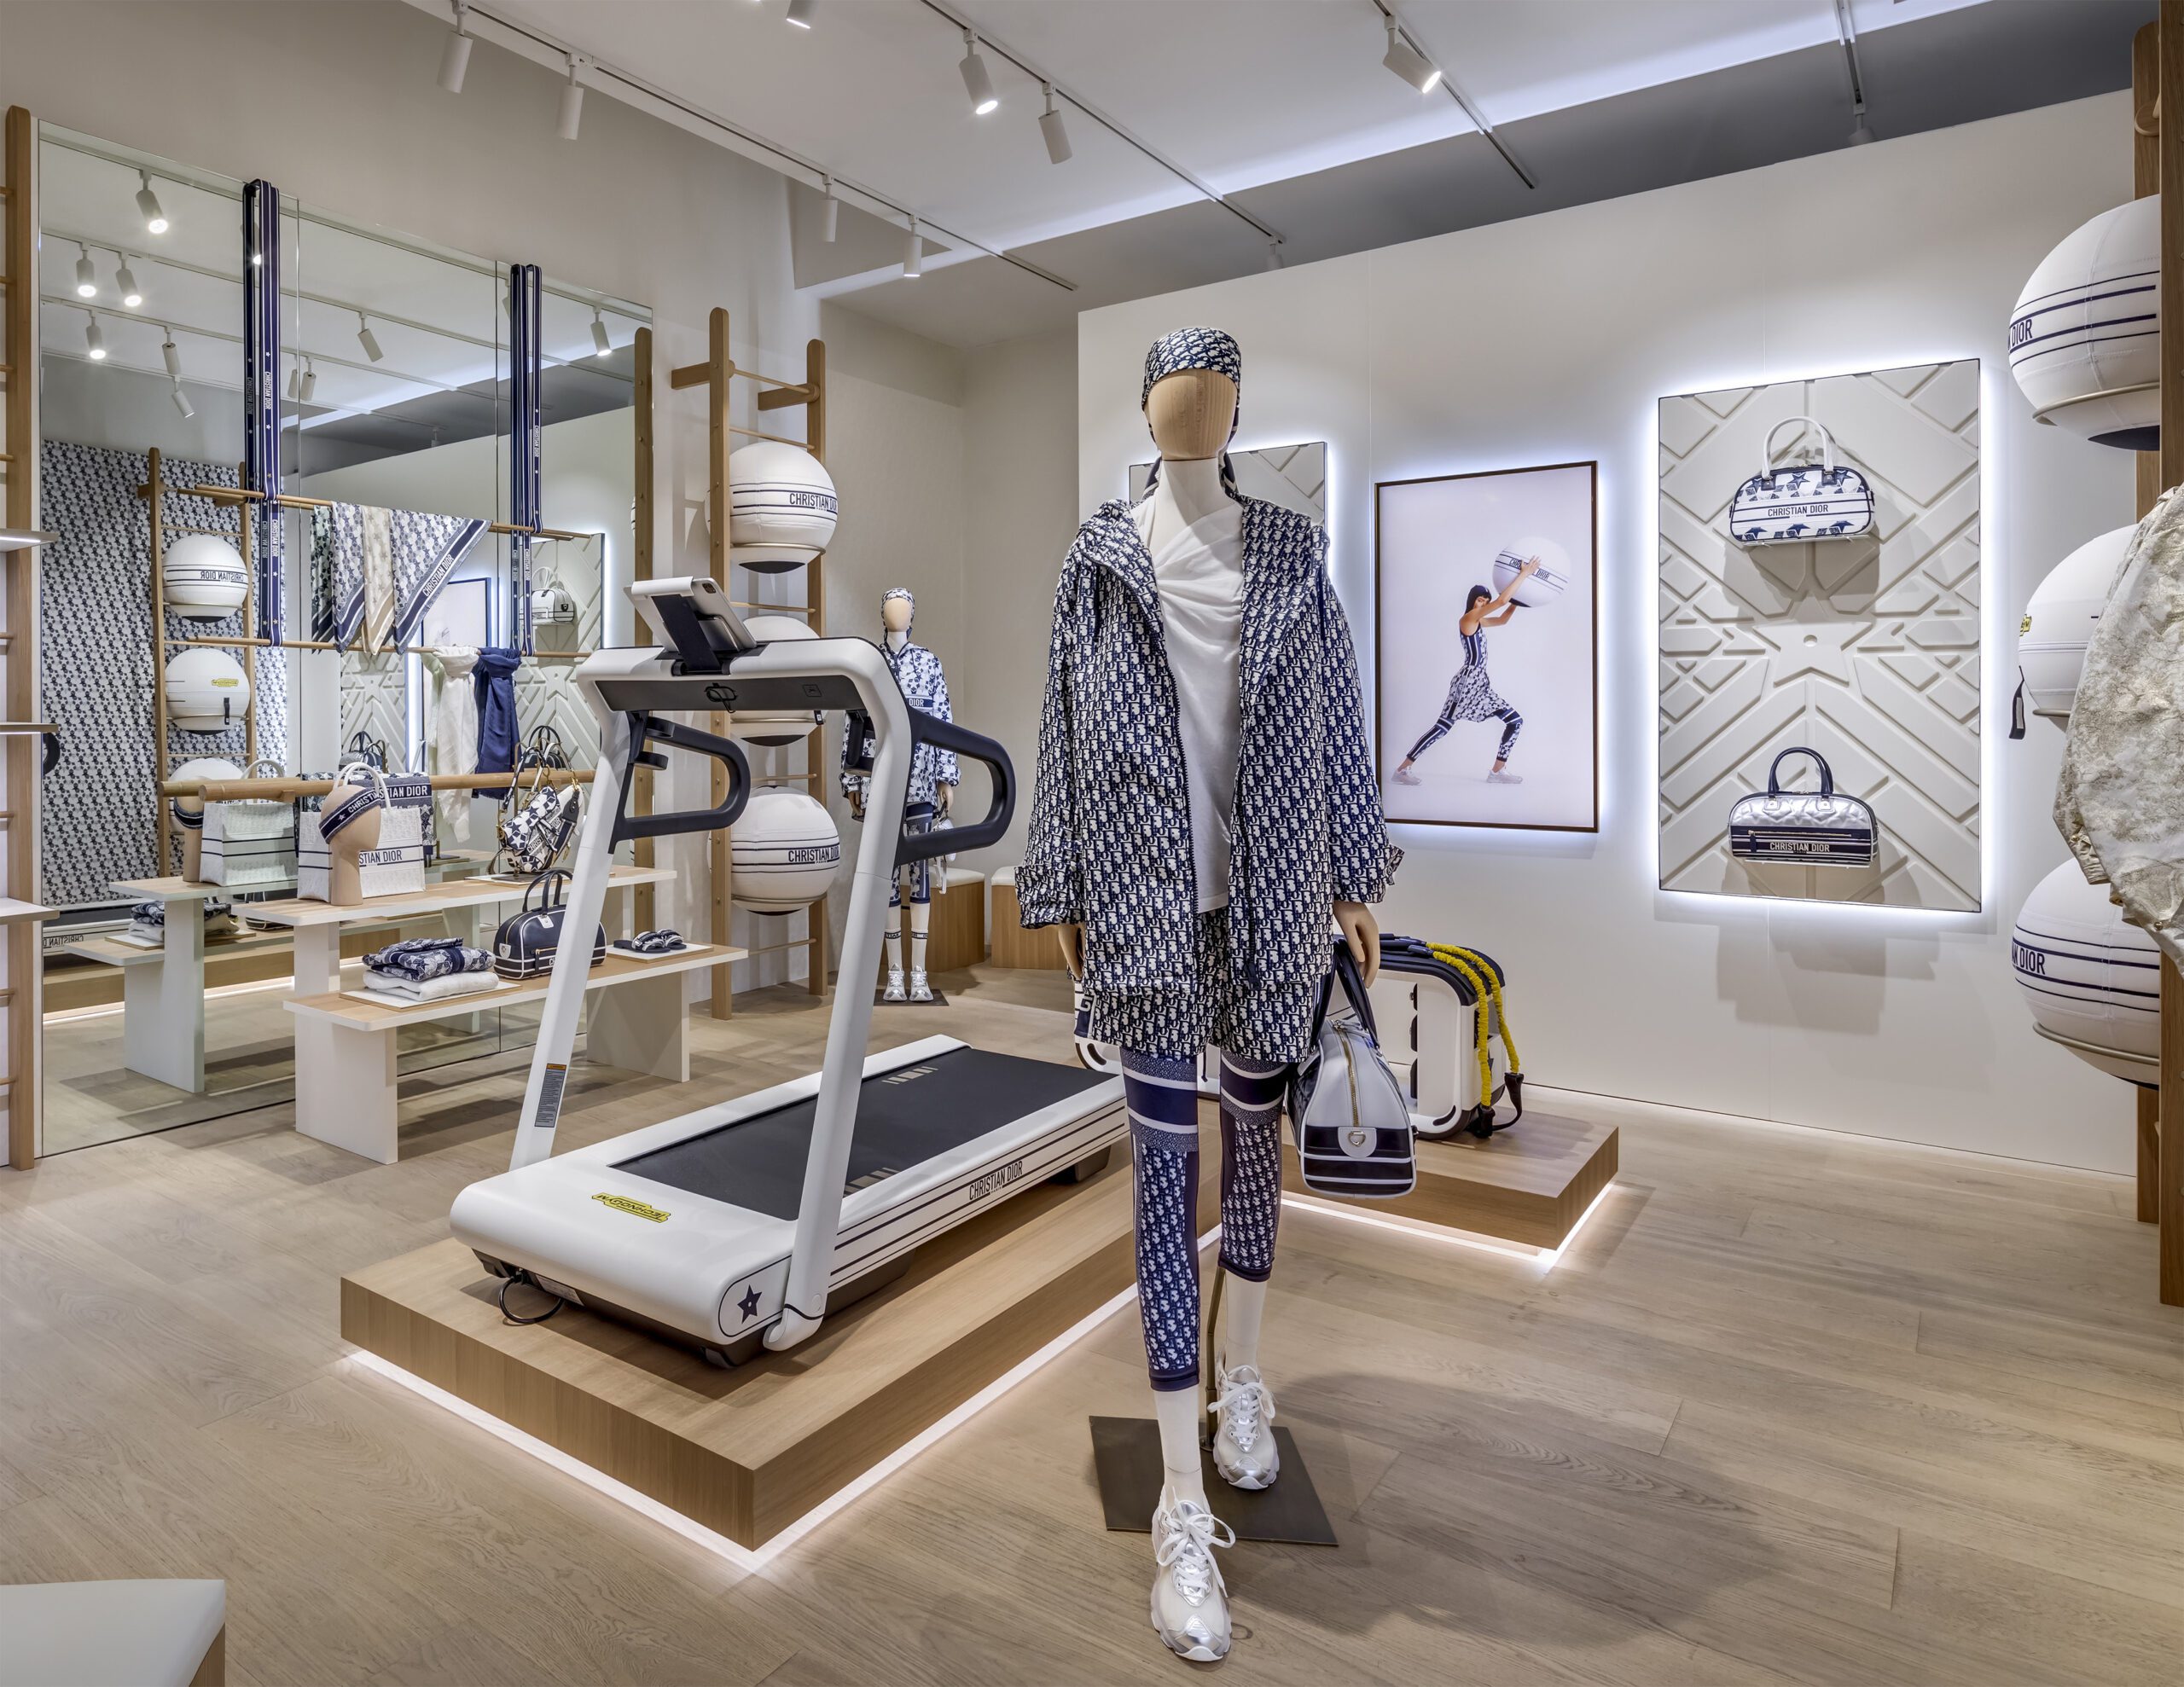 The Dior Vibe Pop-Up Stores feature the Dior and Technogym Limited Edition  pieces🏋🏻 #dior #diortechnogym #diorpopup #diorvibe